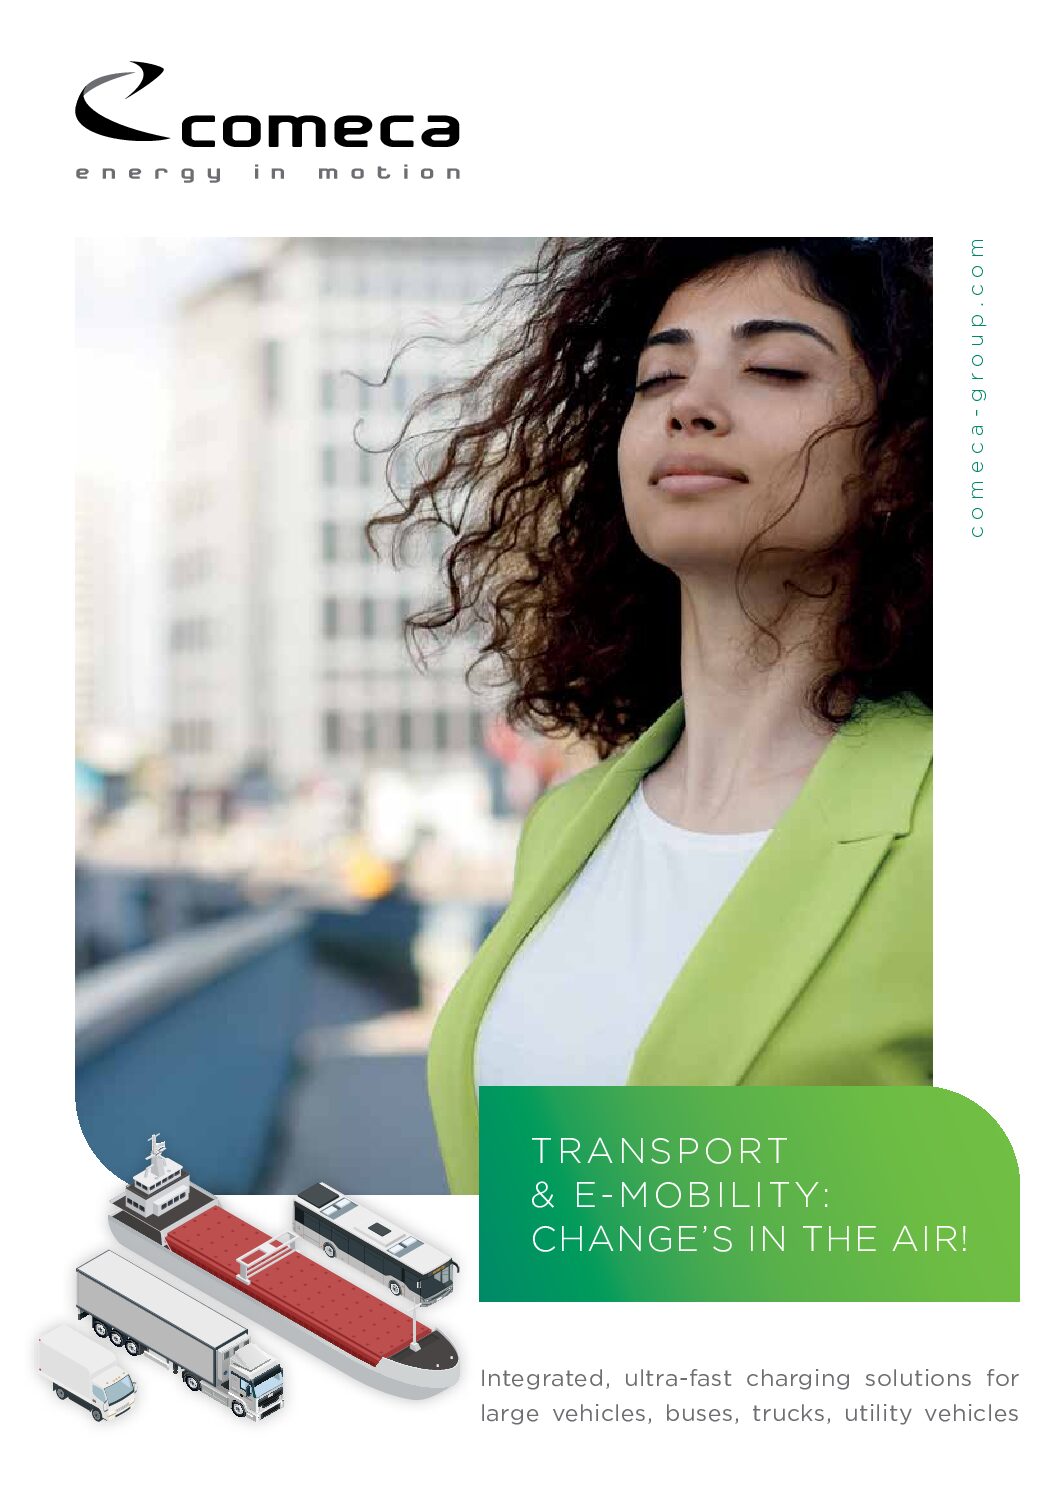 Comeca | Transport & E-Mobility: Change Is in the Air!